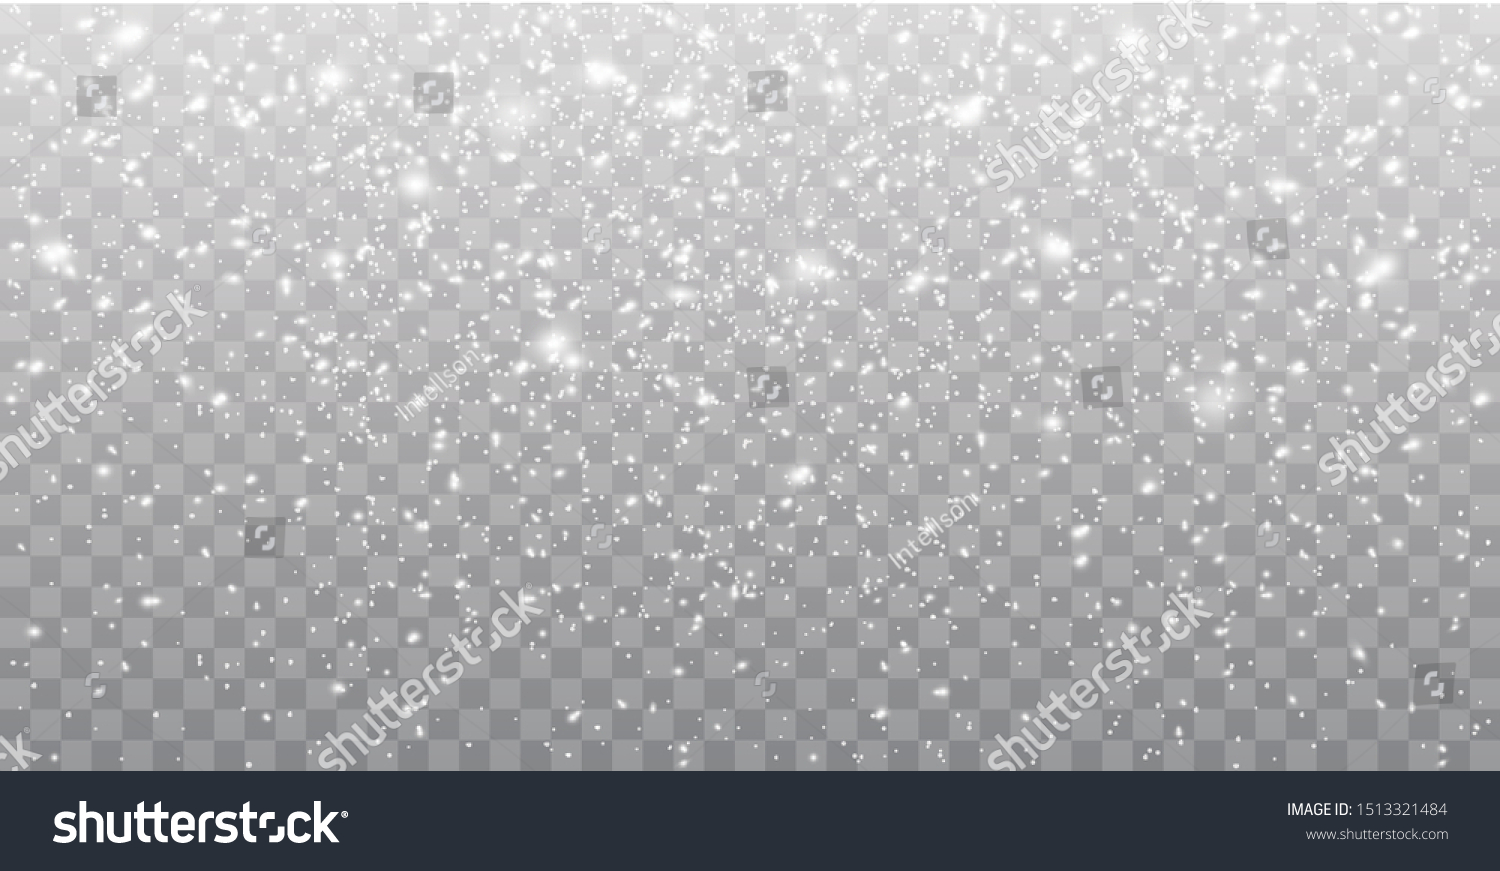 Seamless realistic falling snow or snowflakes. Isolated on transparent background - stock vector. #1513321484